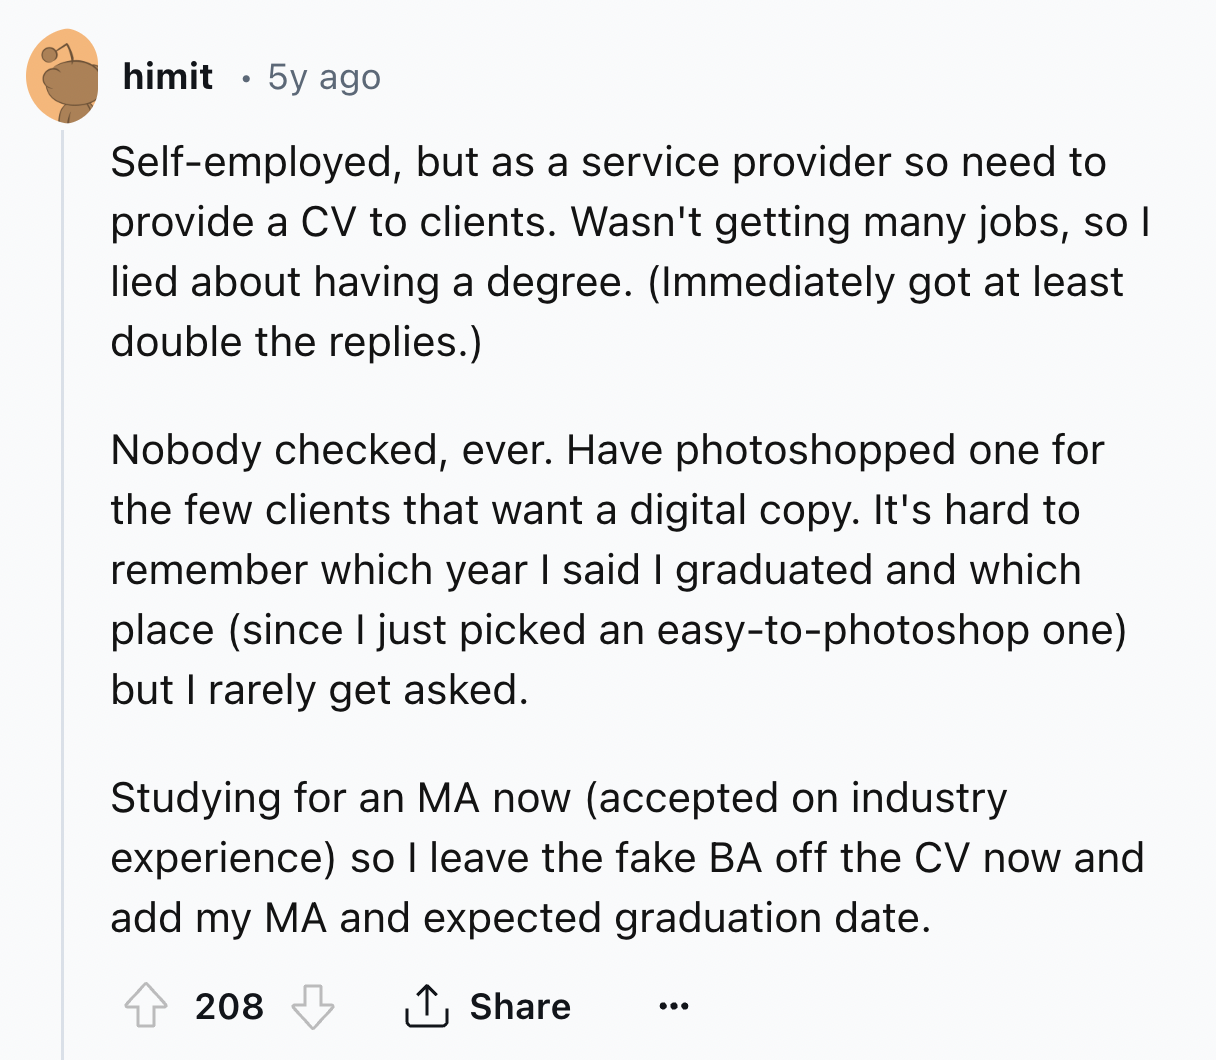 document - himit . 5y ago Selfemployed, but as a service provider so need to provide a Cv to clients. Wasn't getting many jobs, so I lied about having a degree. Immediately got at least double the replies. Nobody checked, ever. Have photoshopped one for t